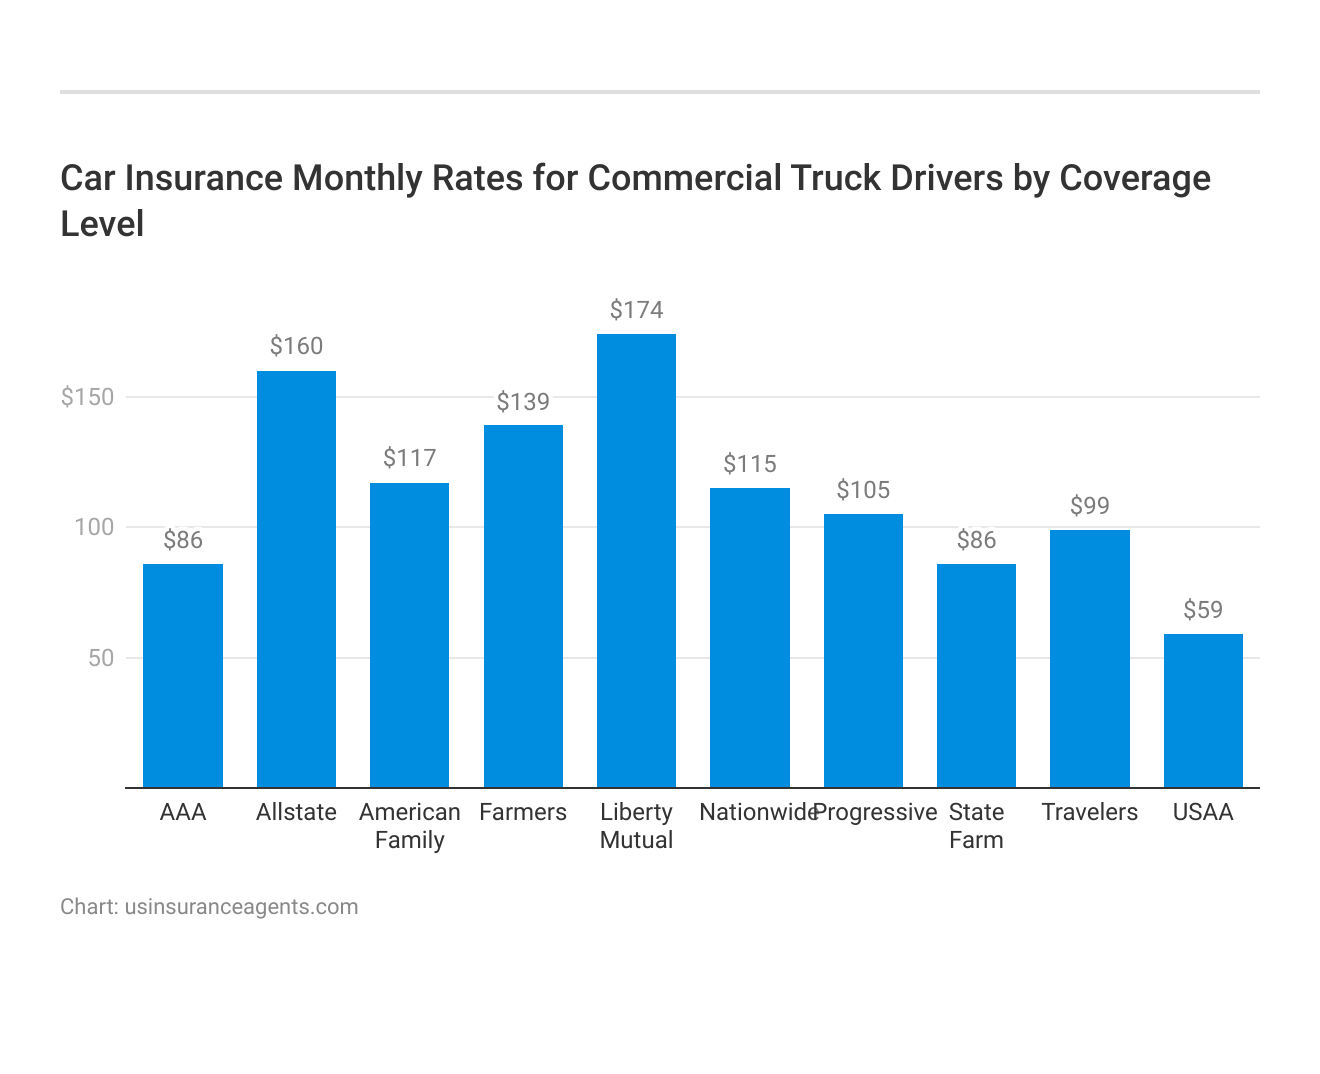 <h3>Car Insurance Monthly Rates for Commercial Truck Drivers by Coverage Level</h3>